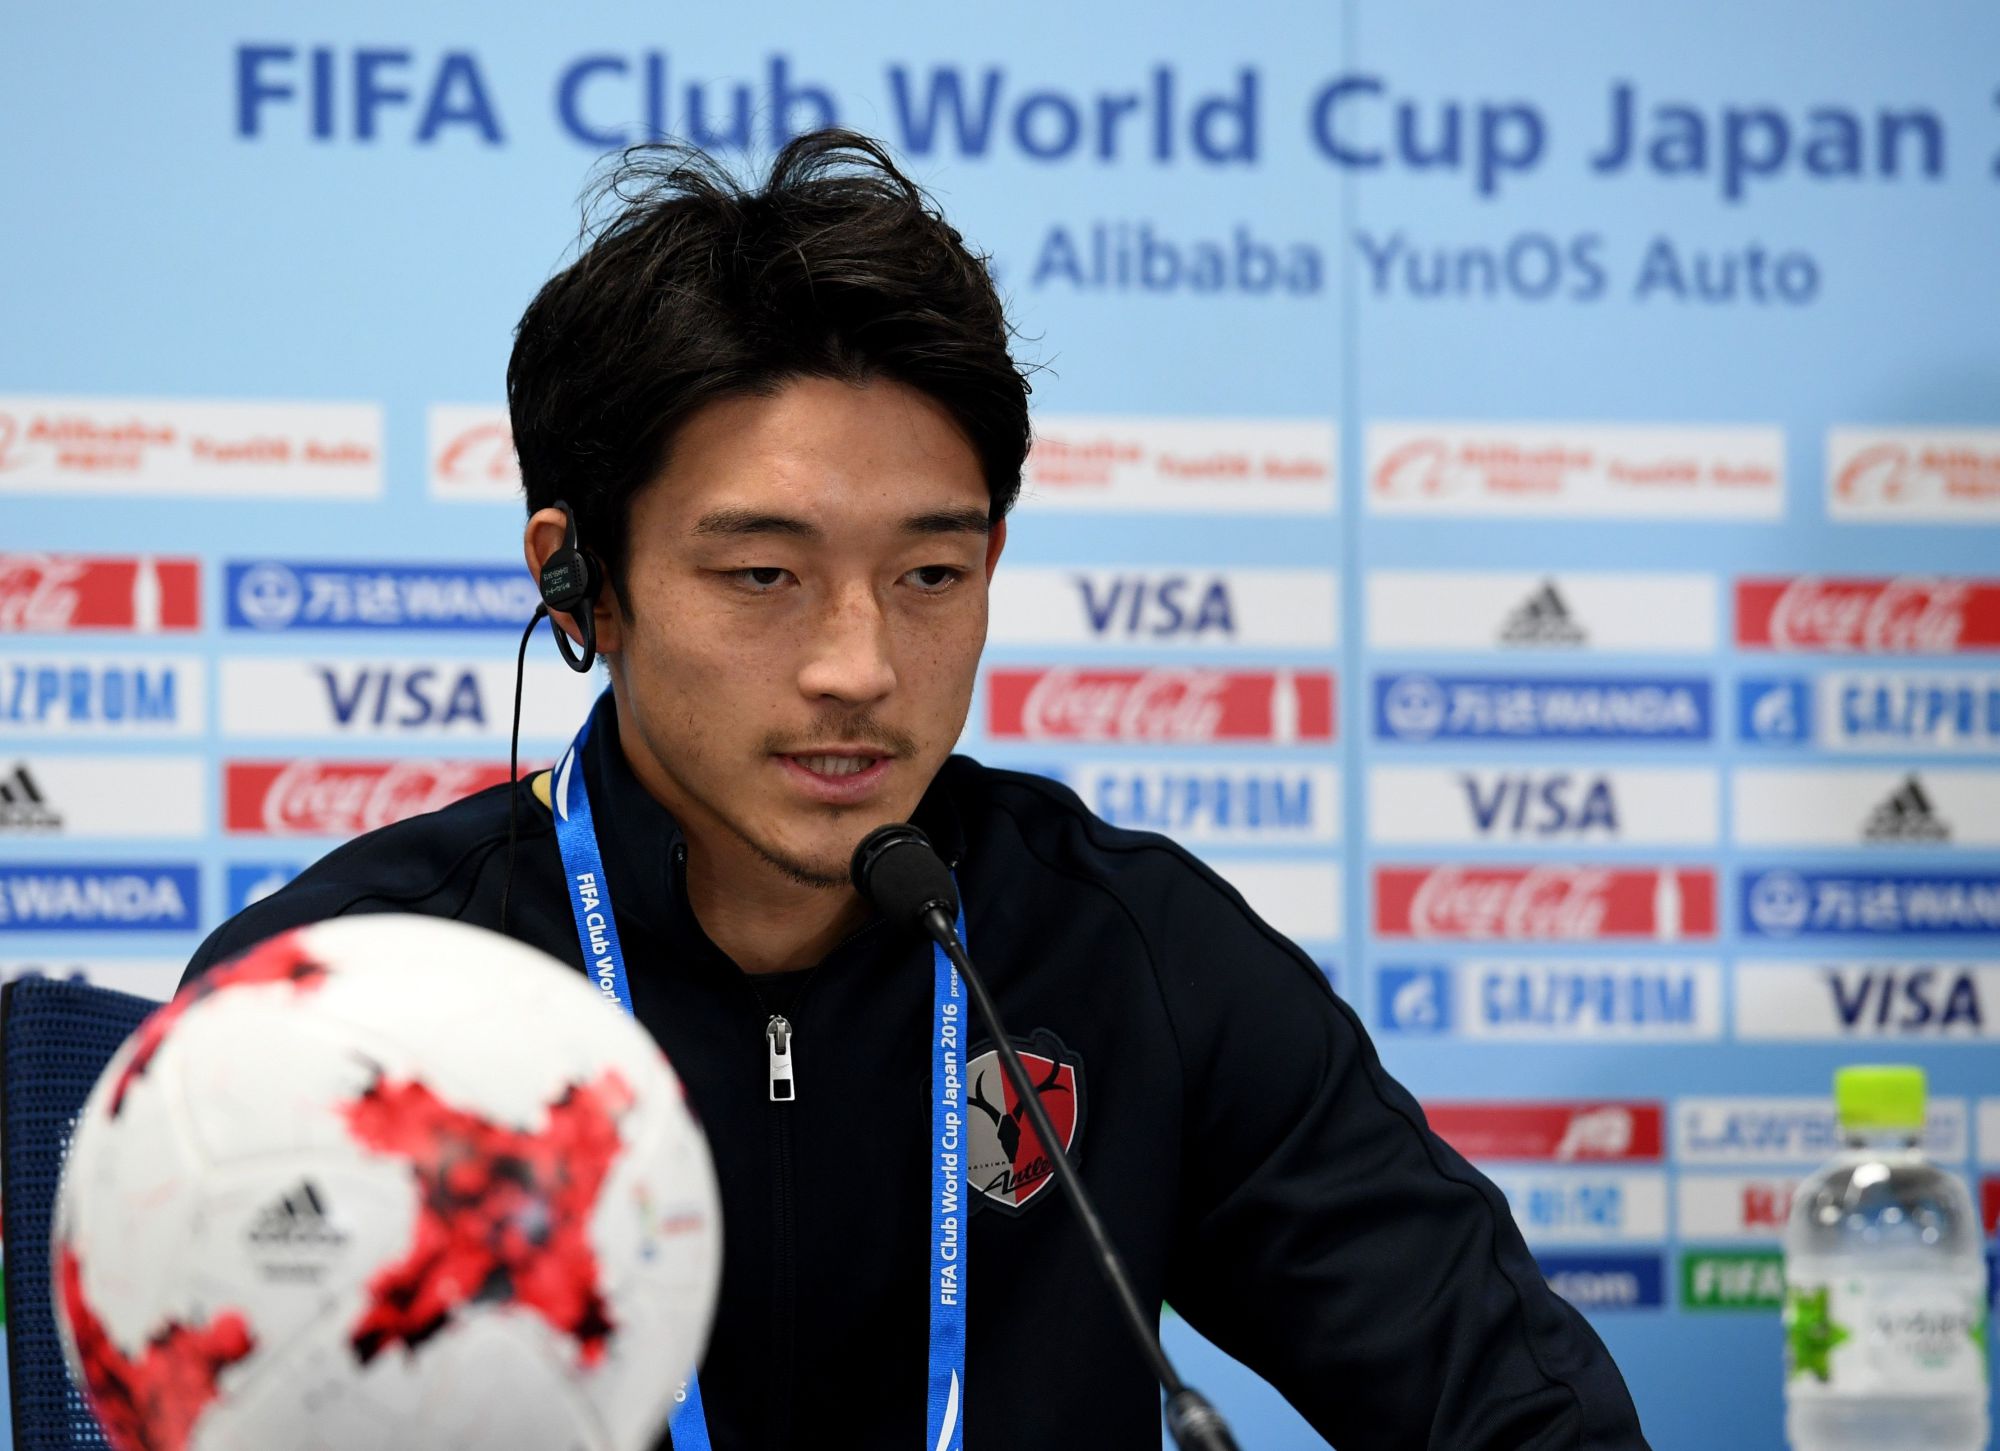 Kashima aims to become first Asian team to reach Club World Cup